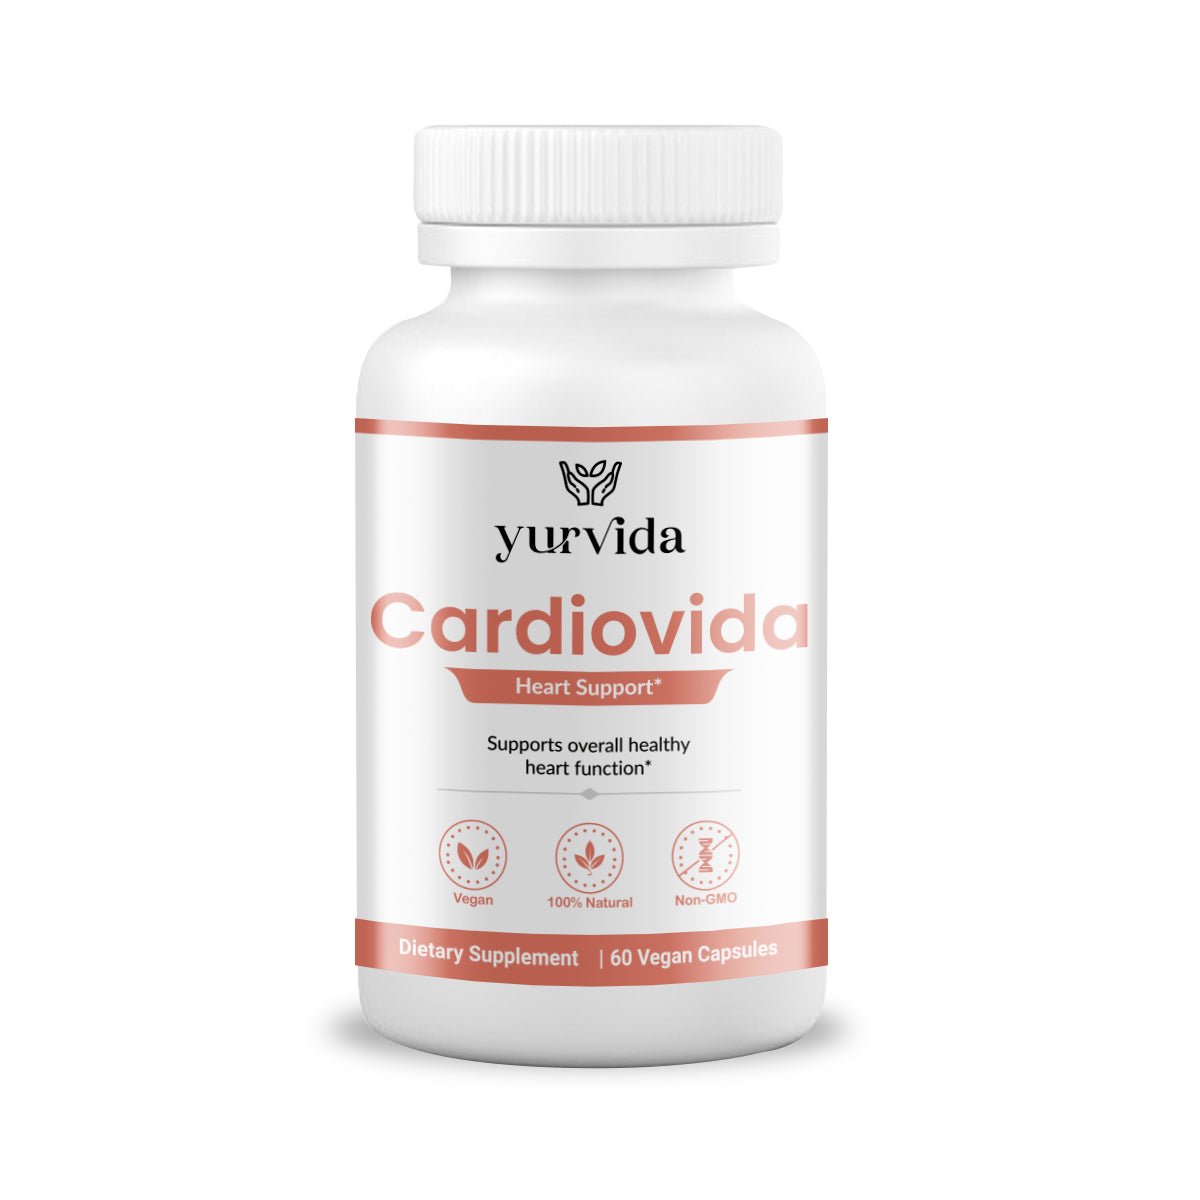 Cardiovida - Expert Formulated Blend to Support Healthy Heart Function*